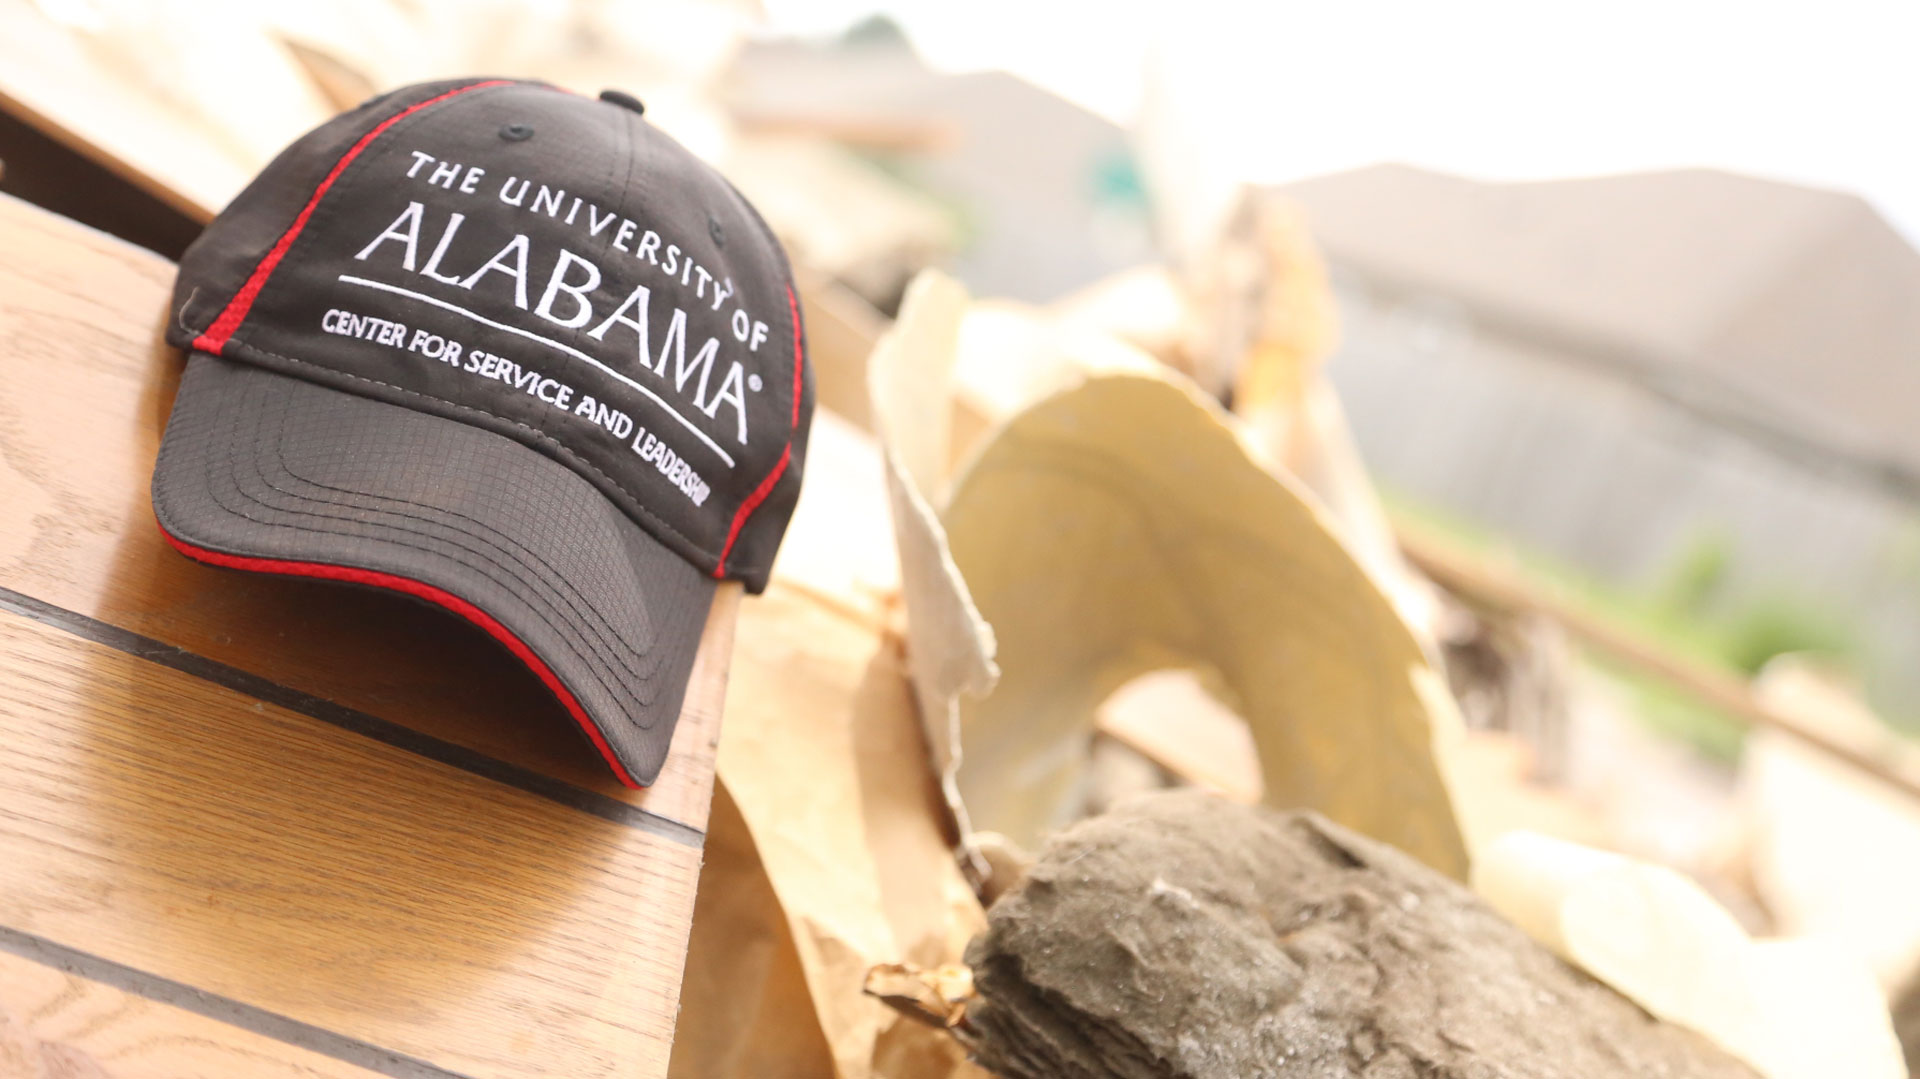 a ball cap hat reading "The University of Alabama Center for Service and Leadership" sits on top of a pile of debris at a volunteer work site.